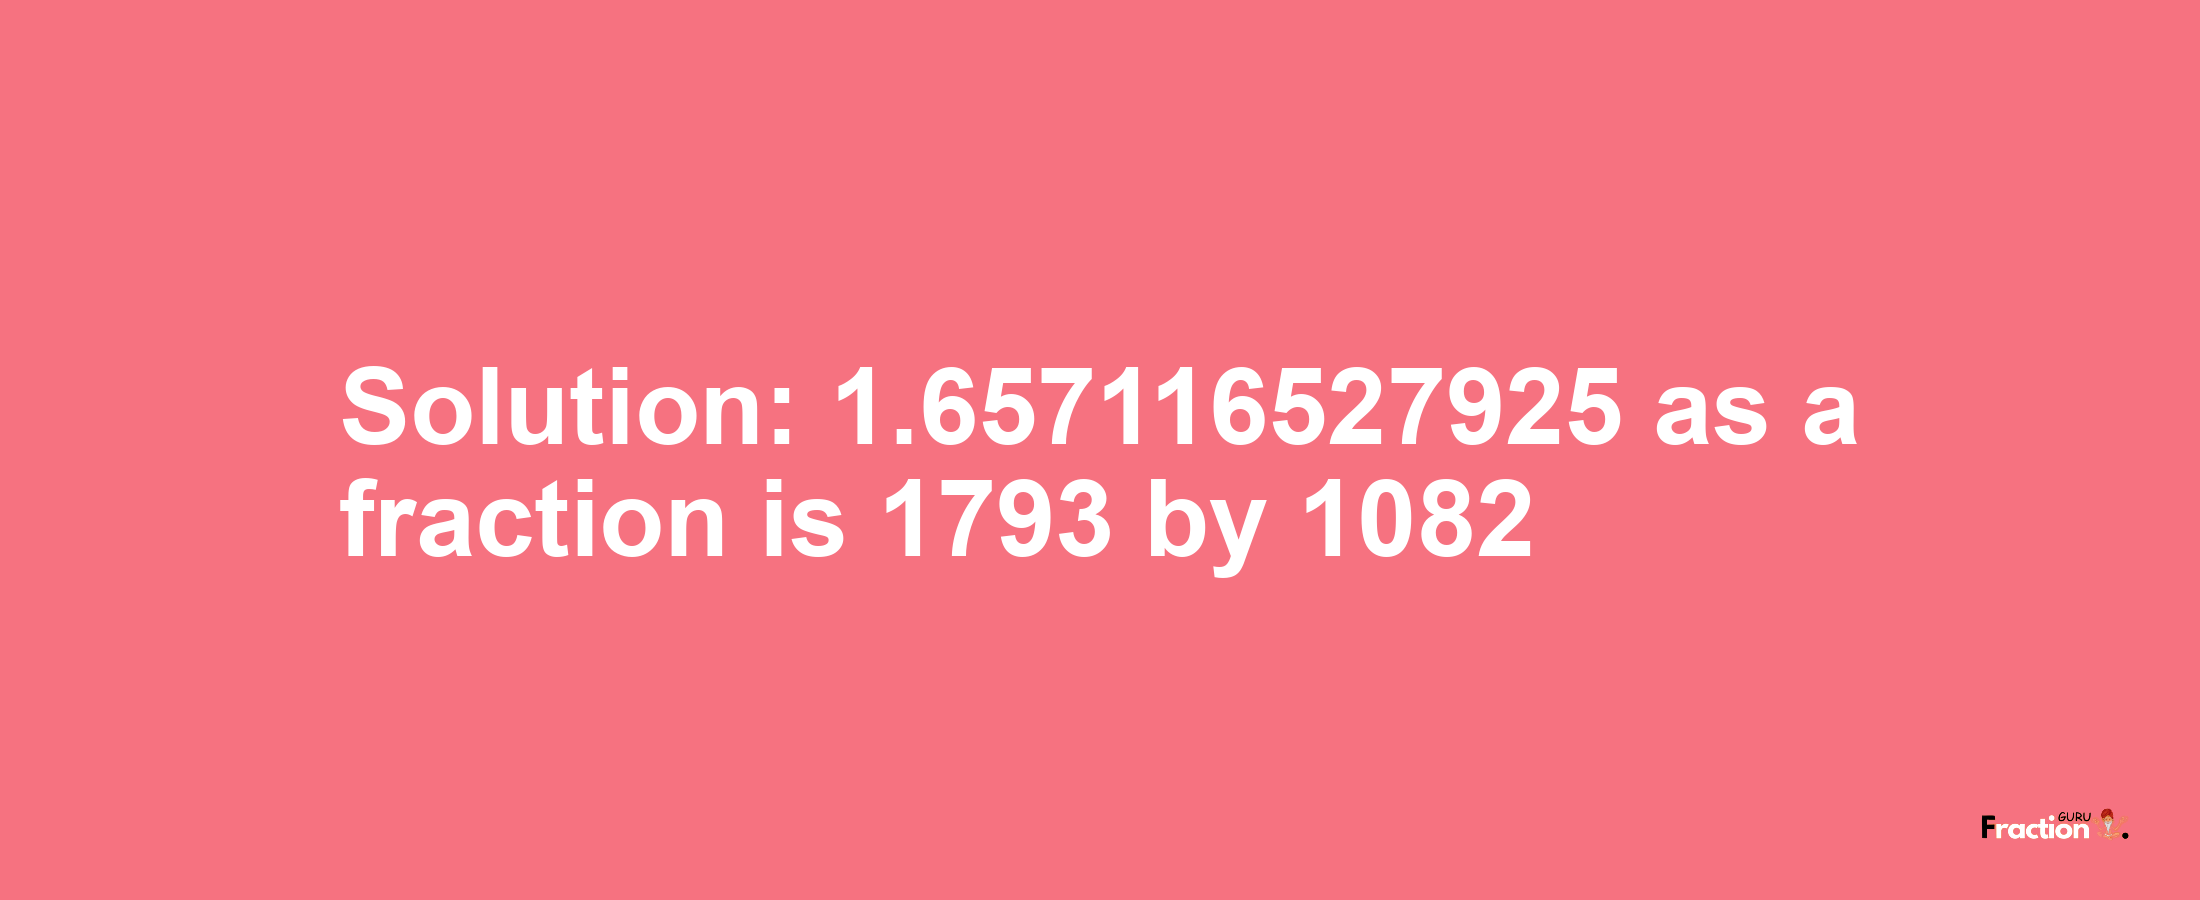 Solution:1.657116527925 as a fraction is 1793/1082